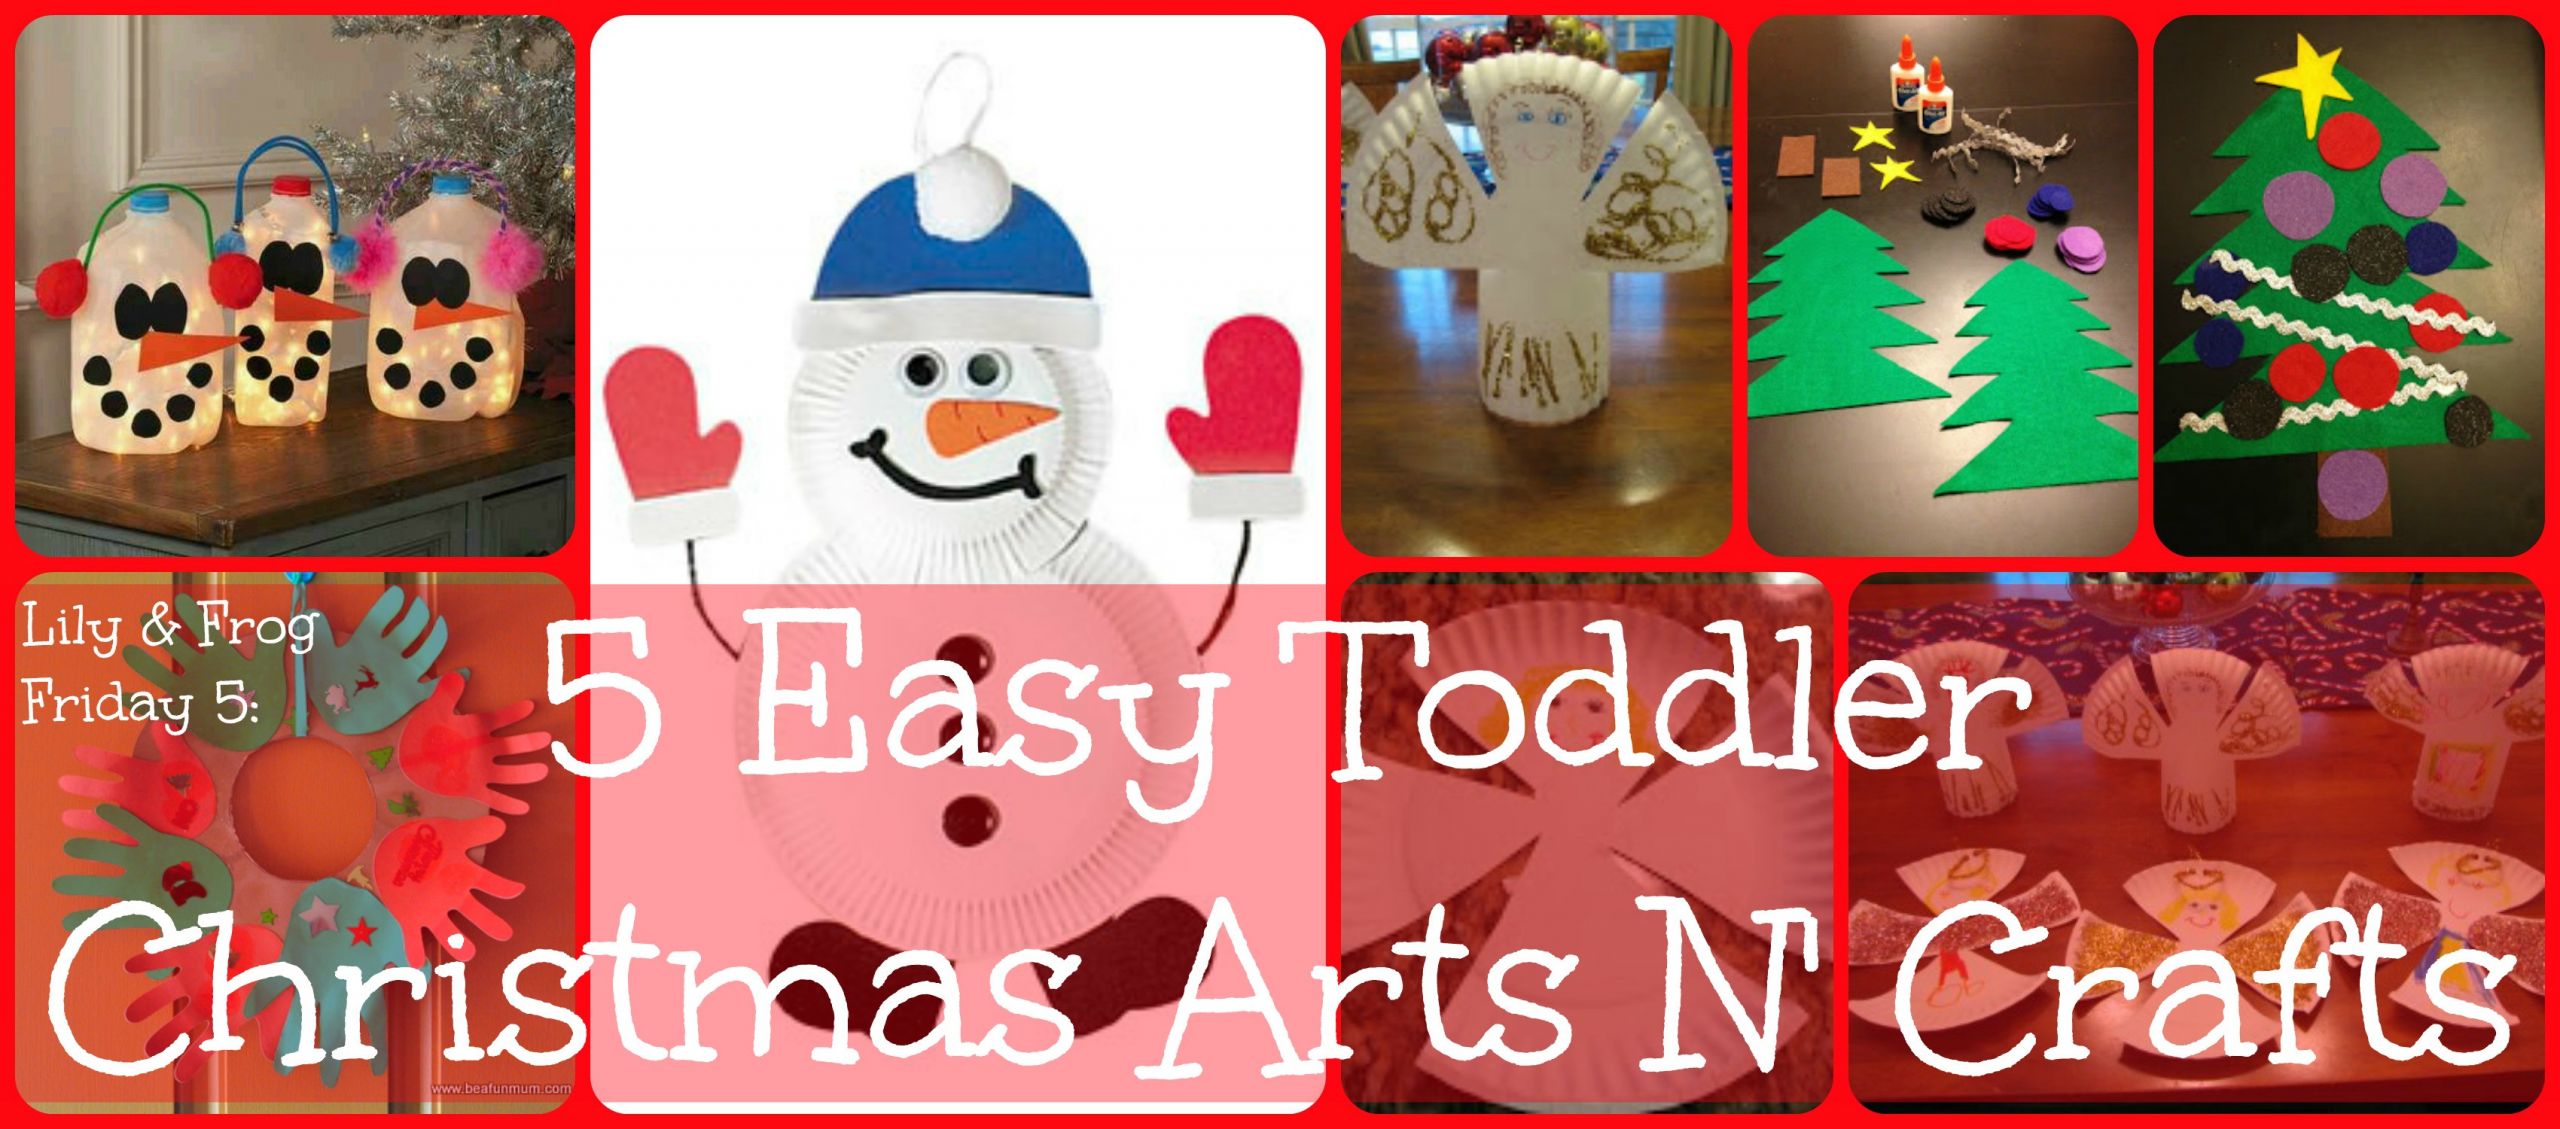 Art N Crafts For Toddlers
 Lily & Frog Friday 5 5 Easy Toddler Christmas Arts N